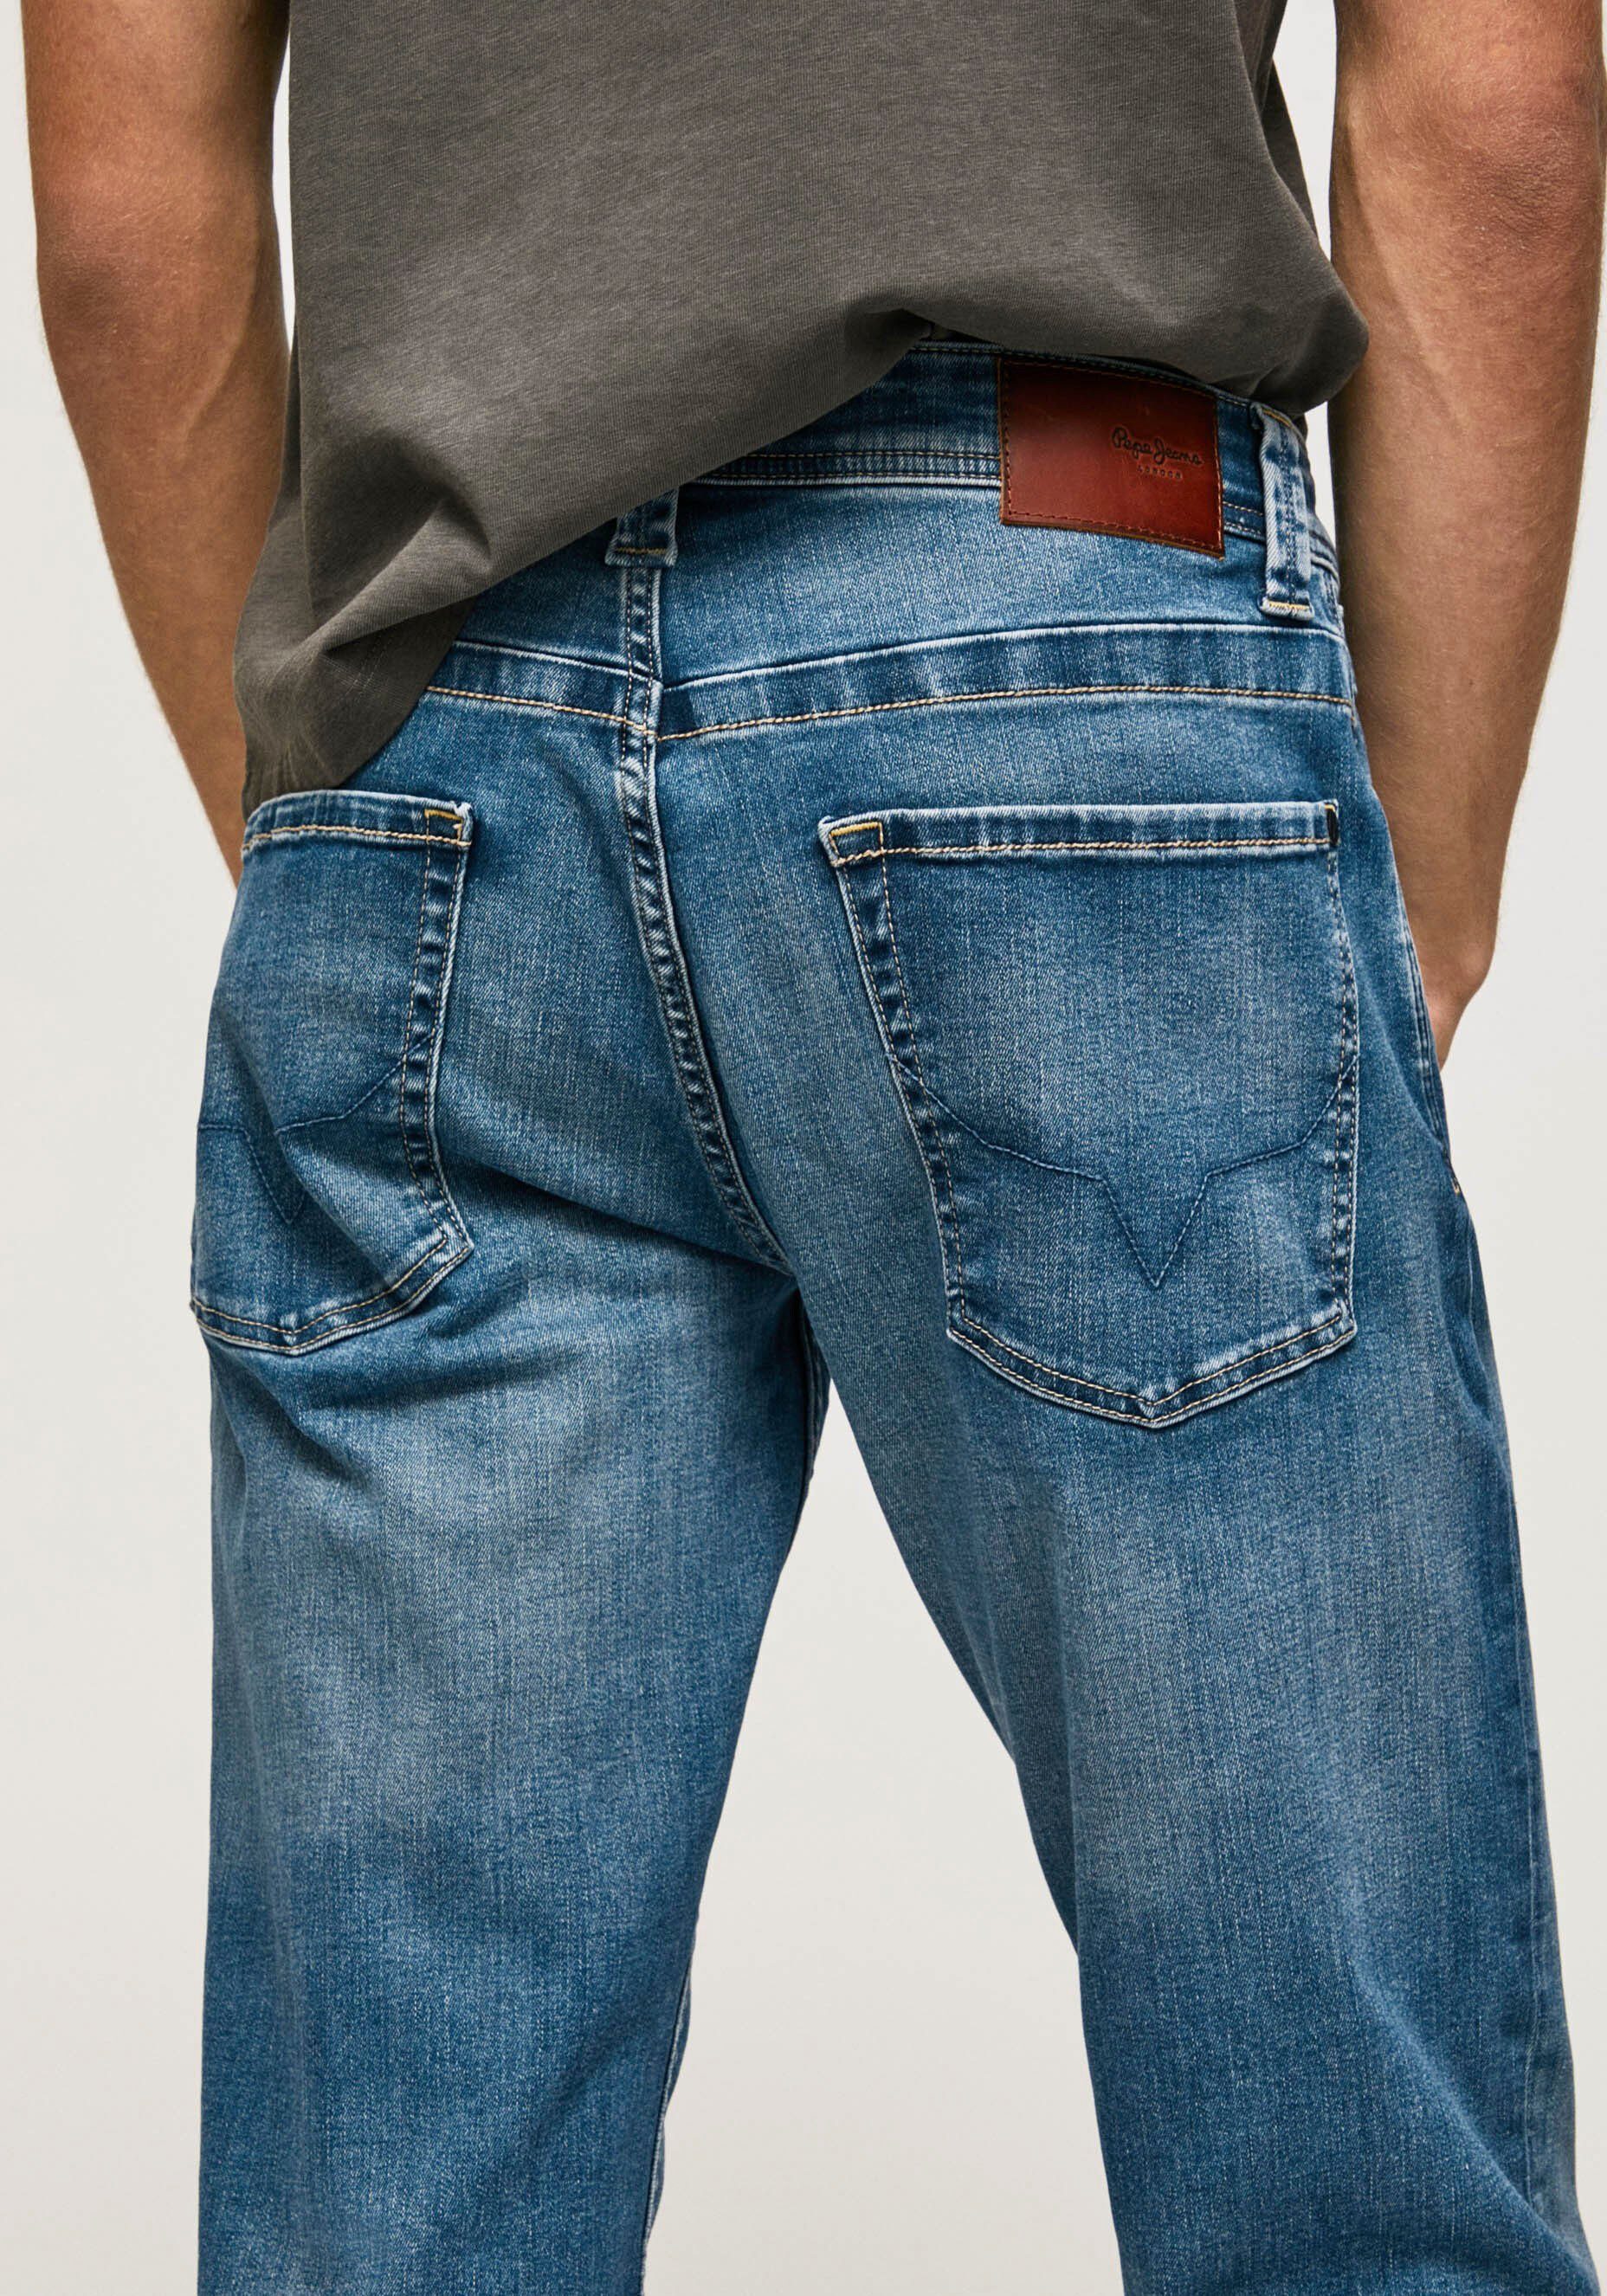 Pepe Jeans Straight-Jeans ZIP in KINGSTON 5-Pocket-Form limewiser